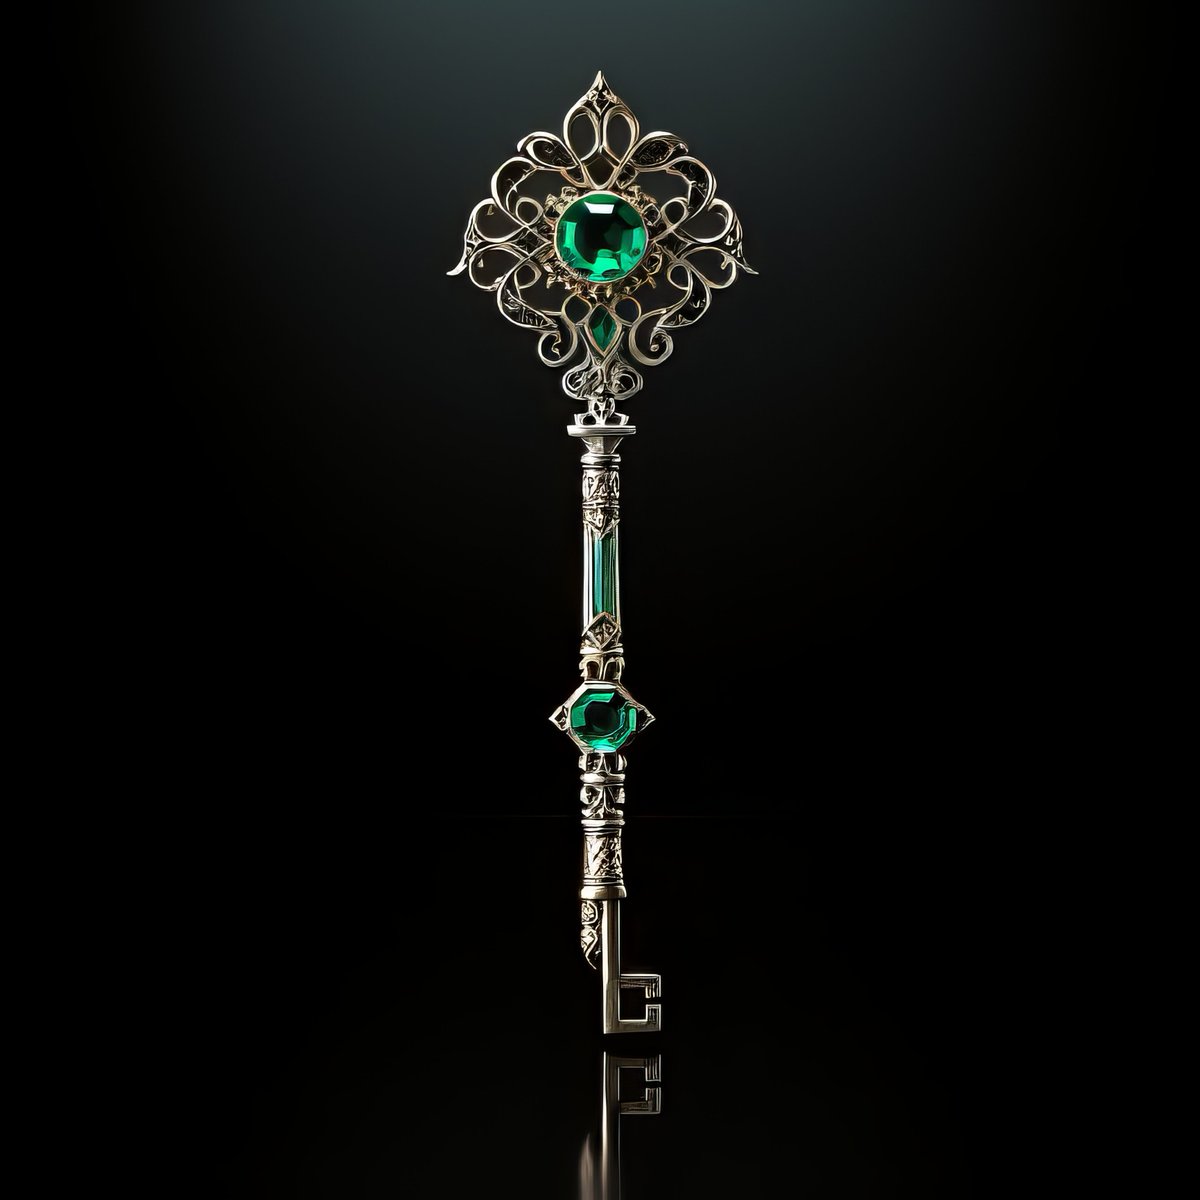 🌌🔑 Embark on a cosmic quest with the 'Usunaar' key! Unlock the secrets of the universe and embrace the mystical wonder! #UsunaarKey #CosmicQuest #MysticWonders 🌠🚪✨ Get yours now on OpenSea: opensea.io/collection/eni…